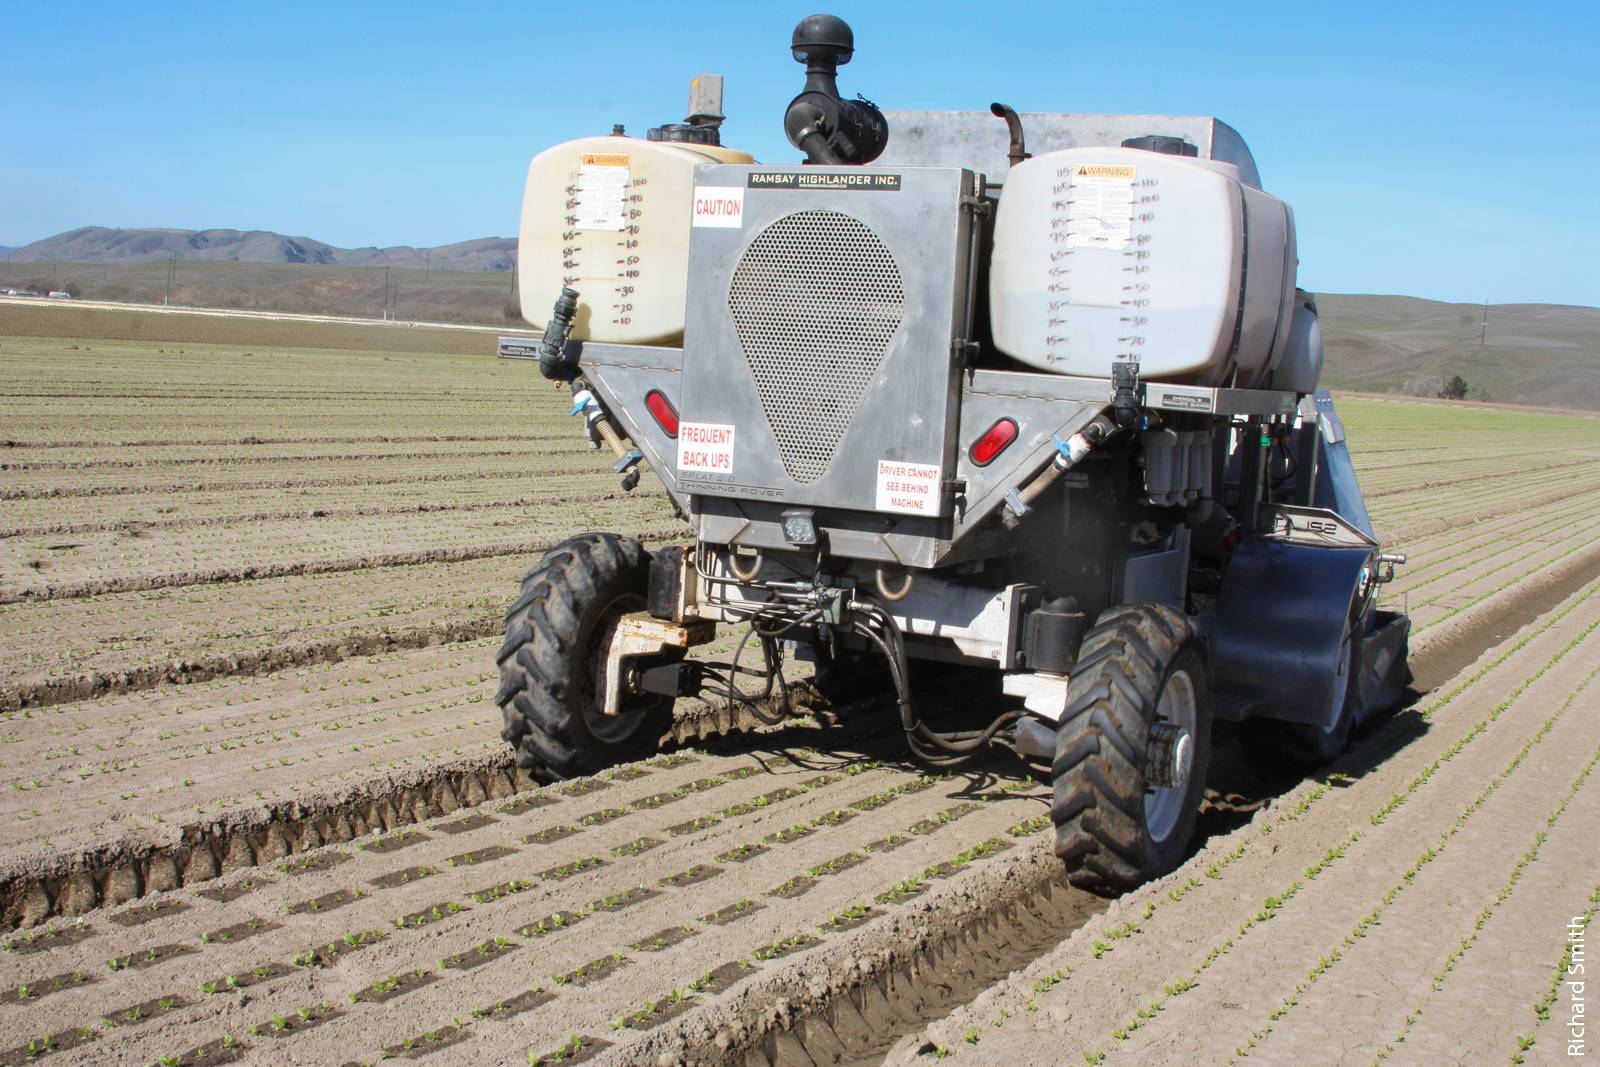 California growers are adopting automated lettuce thinners to improve labor efficiency. An automated thinner pulled behind a tractor can thin up to 18 seedlines at 2 mph. However, doubles left behind must be removed manually.